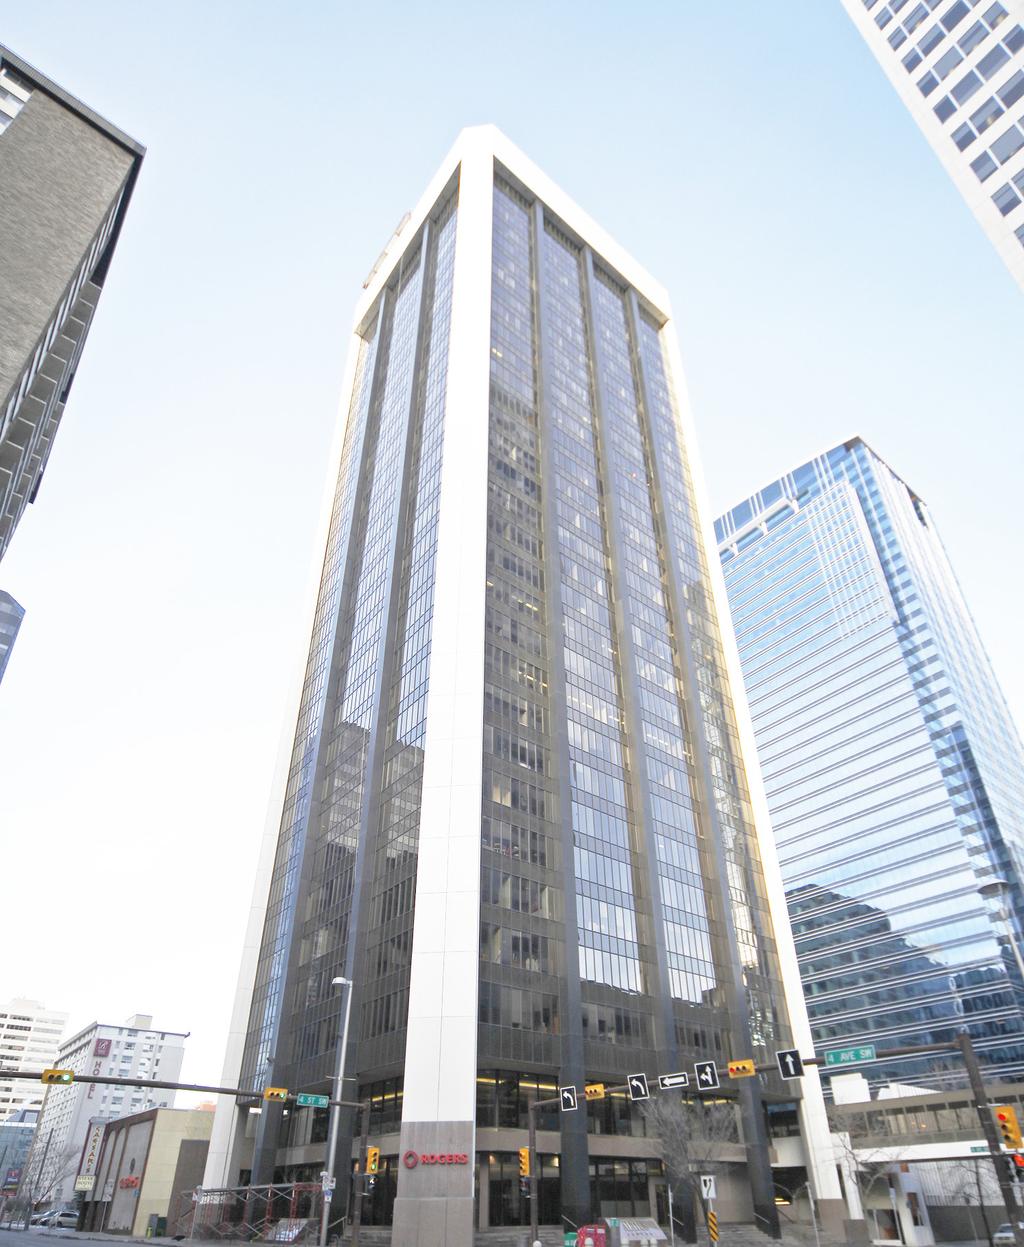 FOR LEASE > OFFICE SACE Altius centre 500-4TH AVENUE SW,, AB RANDY FENNESSEY resident 40 571 876 randy.fennessey@colliers.